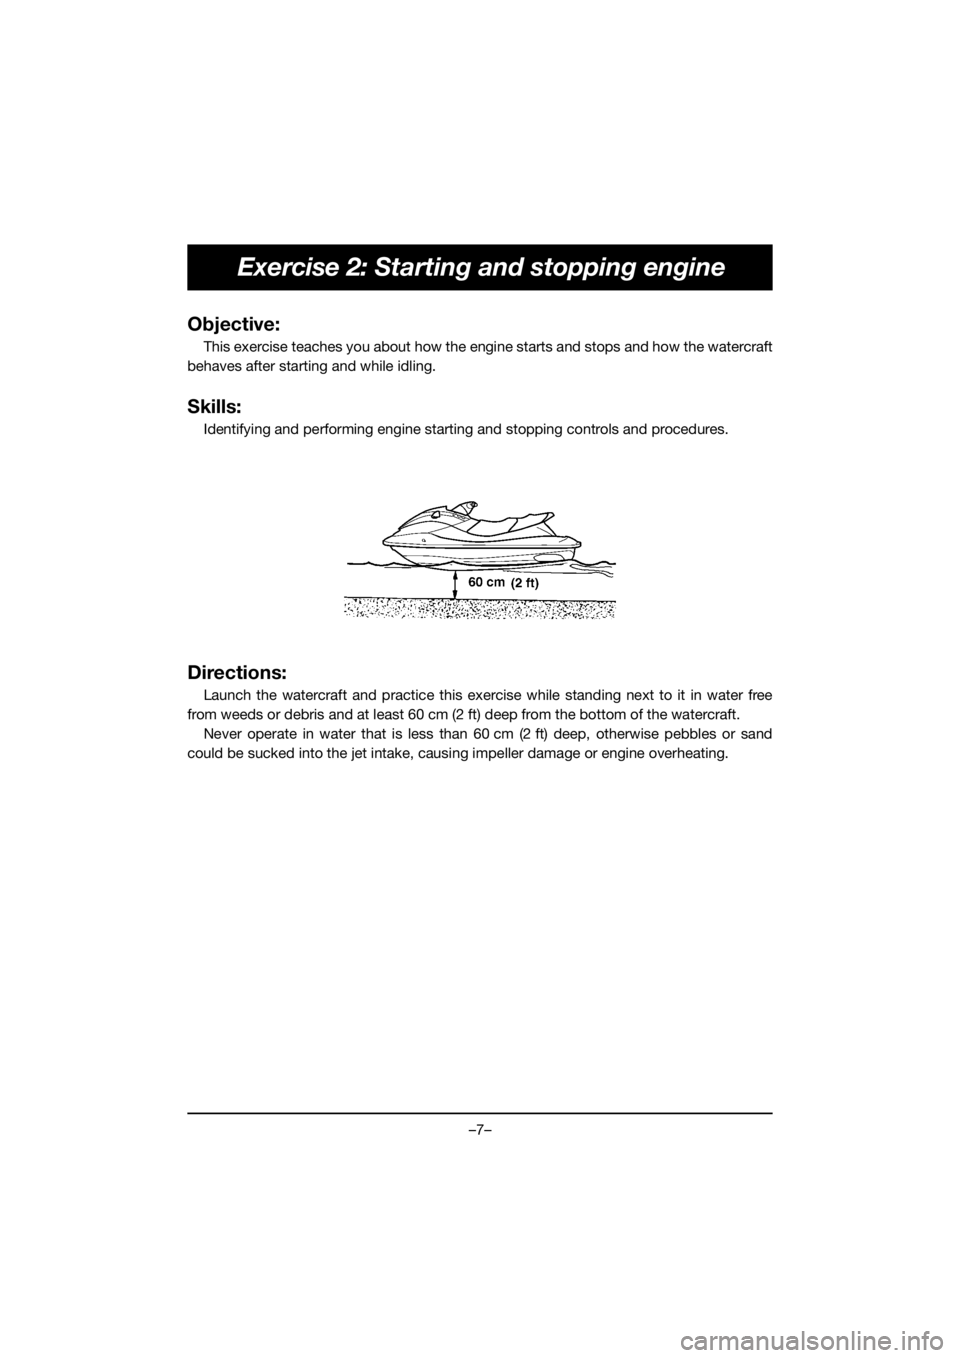 YAMAHA FJR1300 2020  Manuale duso (in Italian) –7–
Exercise 2: Starting and stopping engine
Objective:
This exercise teaches you about how the engine starts and stops and how the watercraft
behaves after starting and while idling.
Skills:
Iden